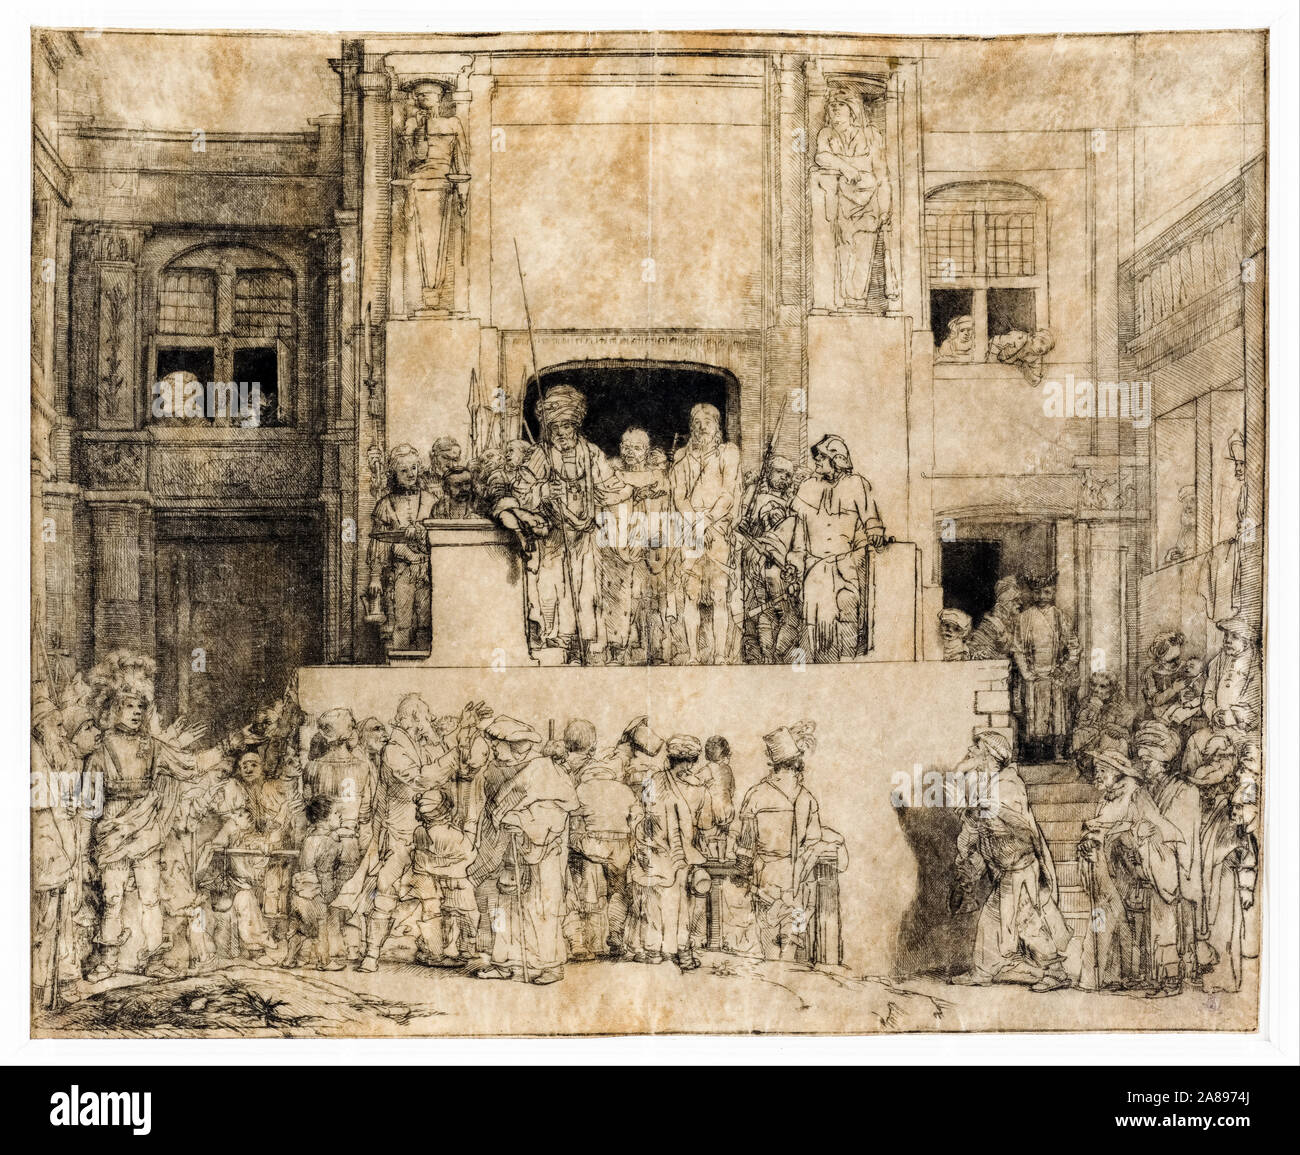 Rembrandt van Rijn, Christ presented to the people, (the oblong plate), drypoint, 1655 Stock Photo